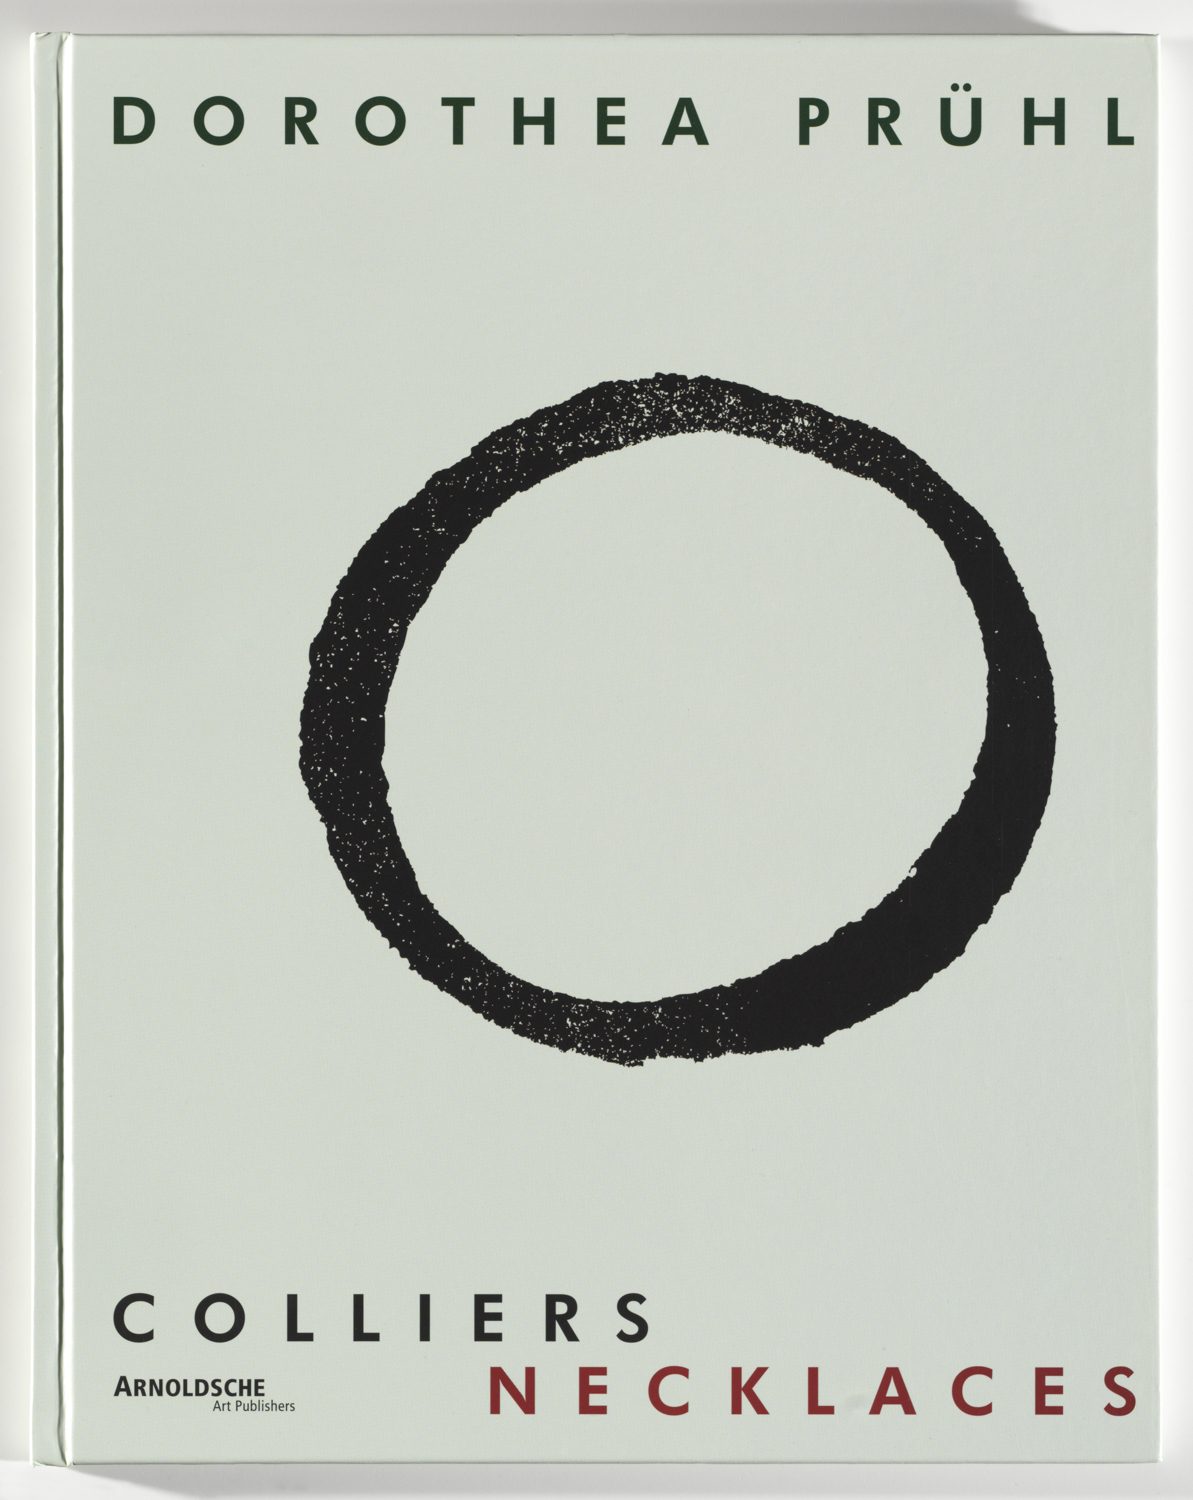 On a white background, an almost round circle slightly shifted from the centre to the right with irregular line thickness as if drawn by hand. Inscription above: Dorothea Prühl, below: Colliers Necklaces.